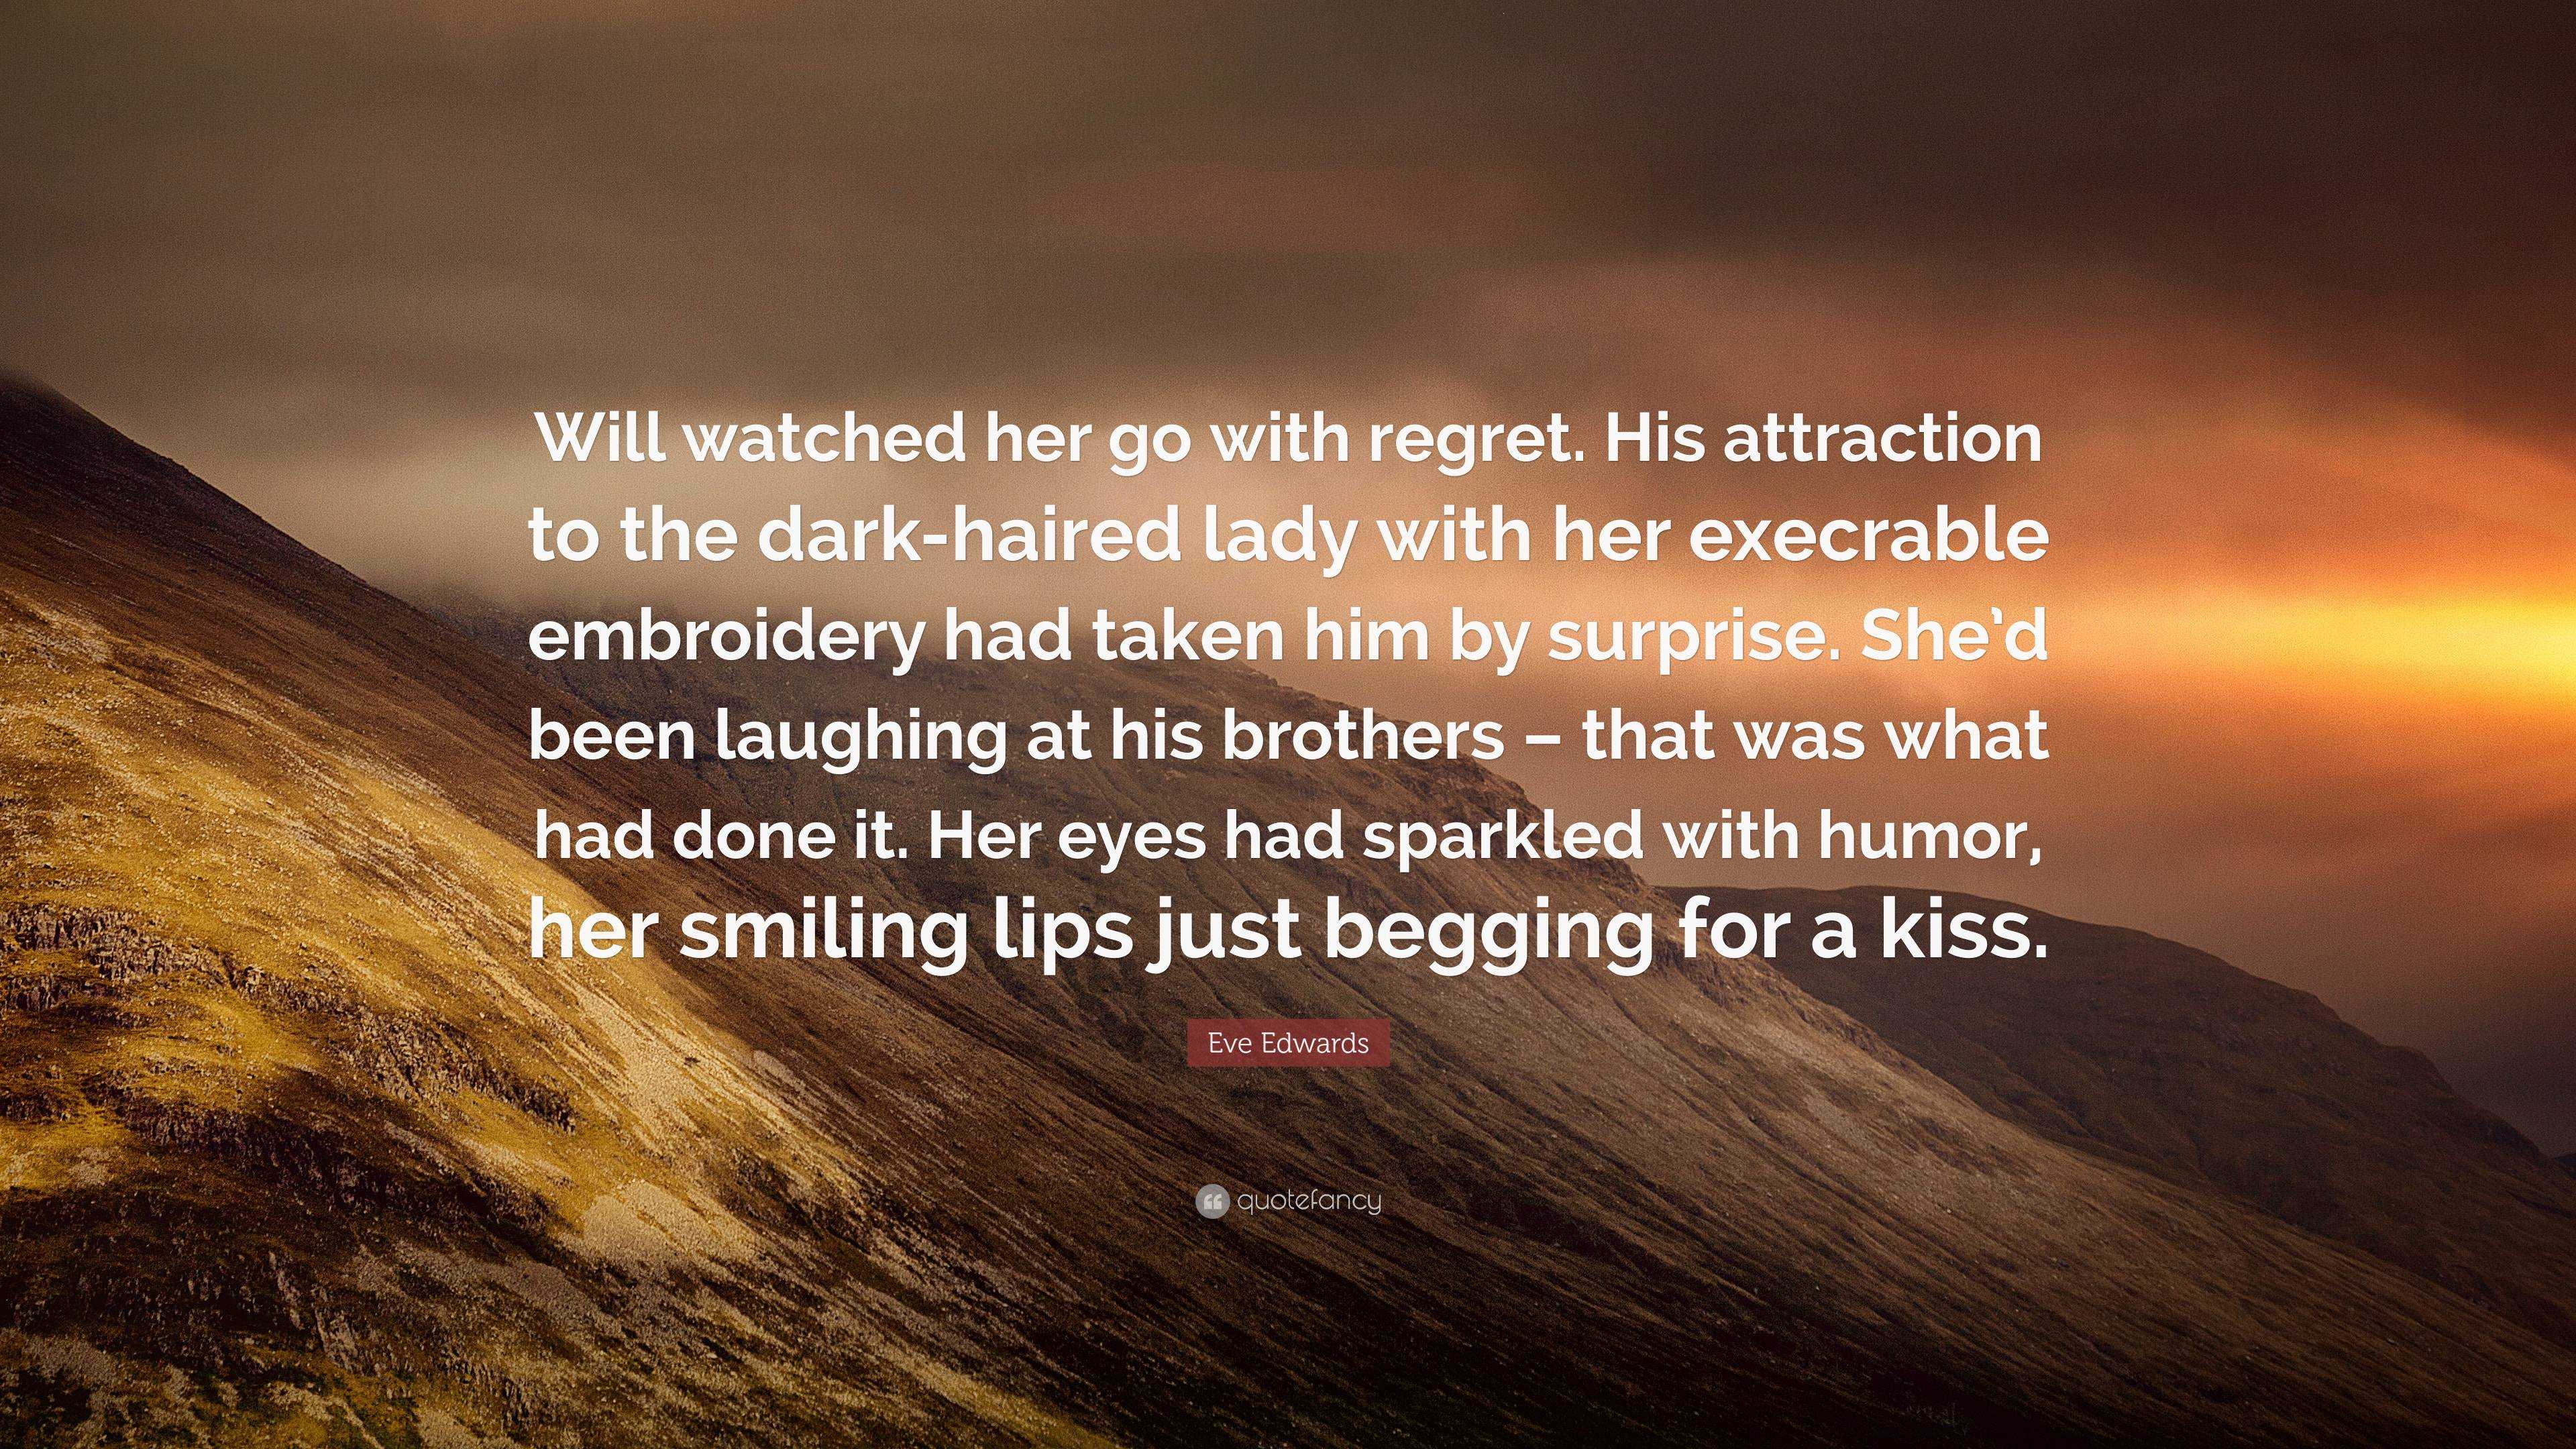 Eve Edwards Quote: “Will watched her go with regret. His attraction to ...